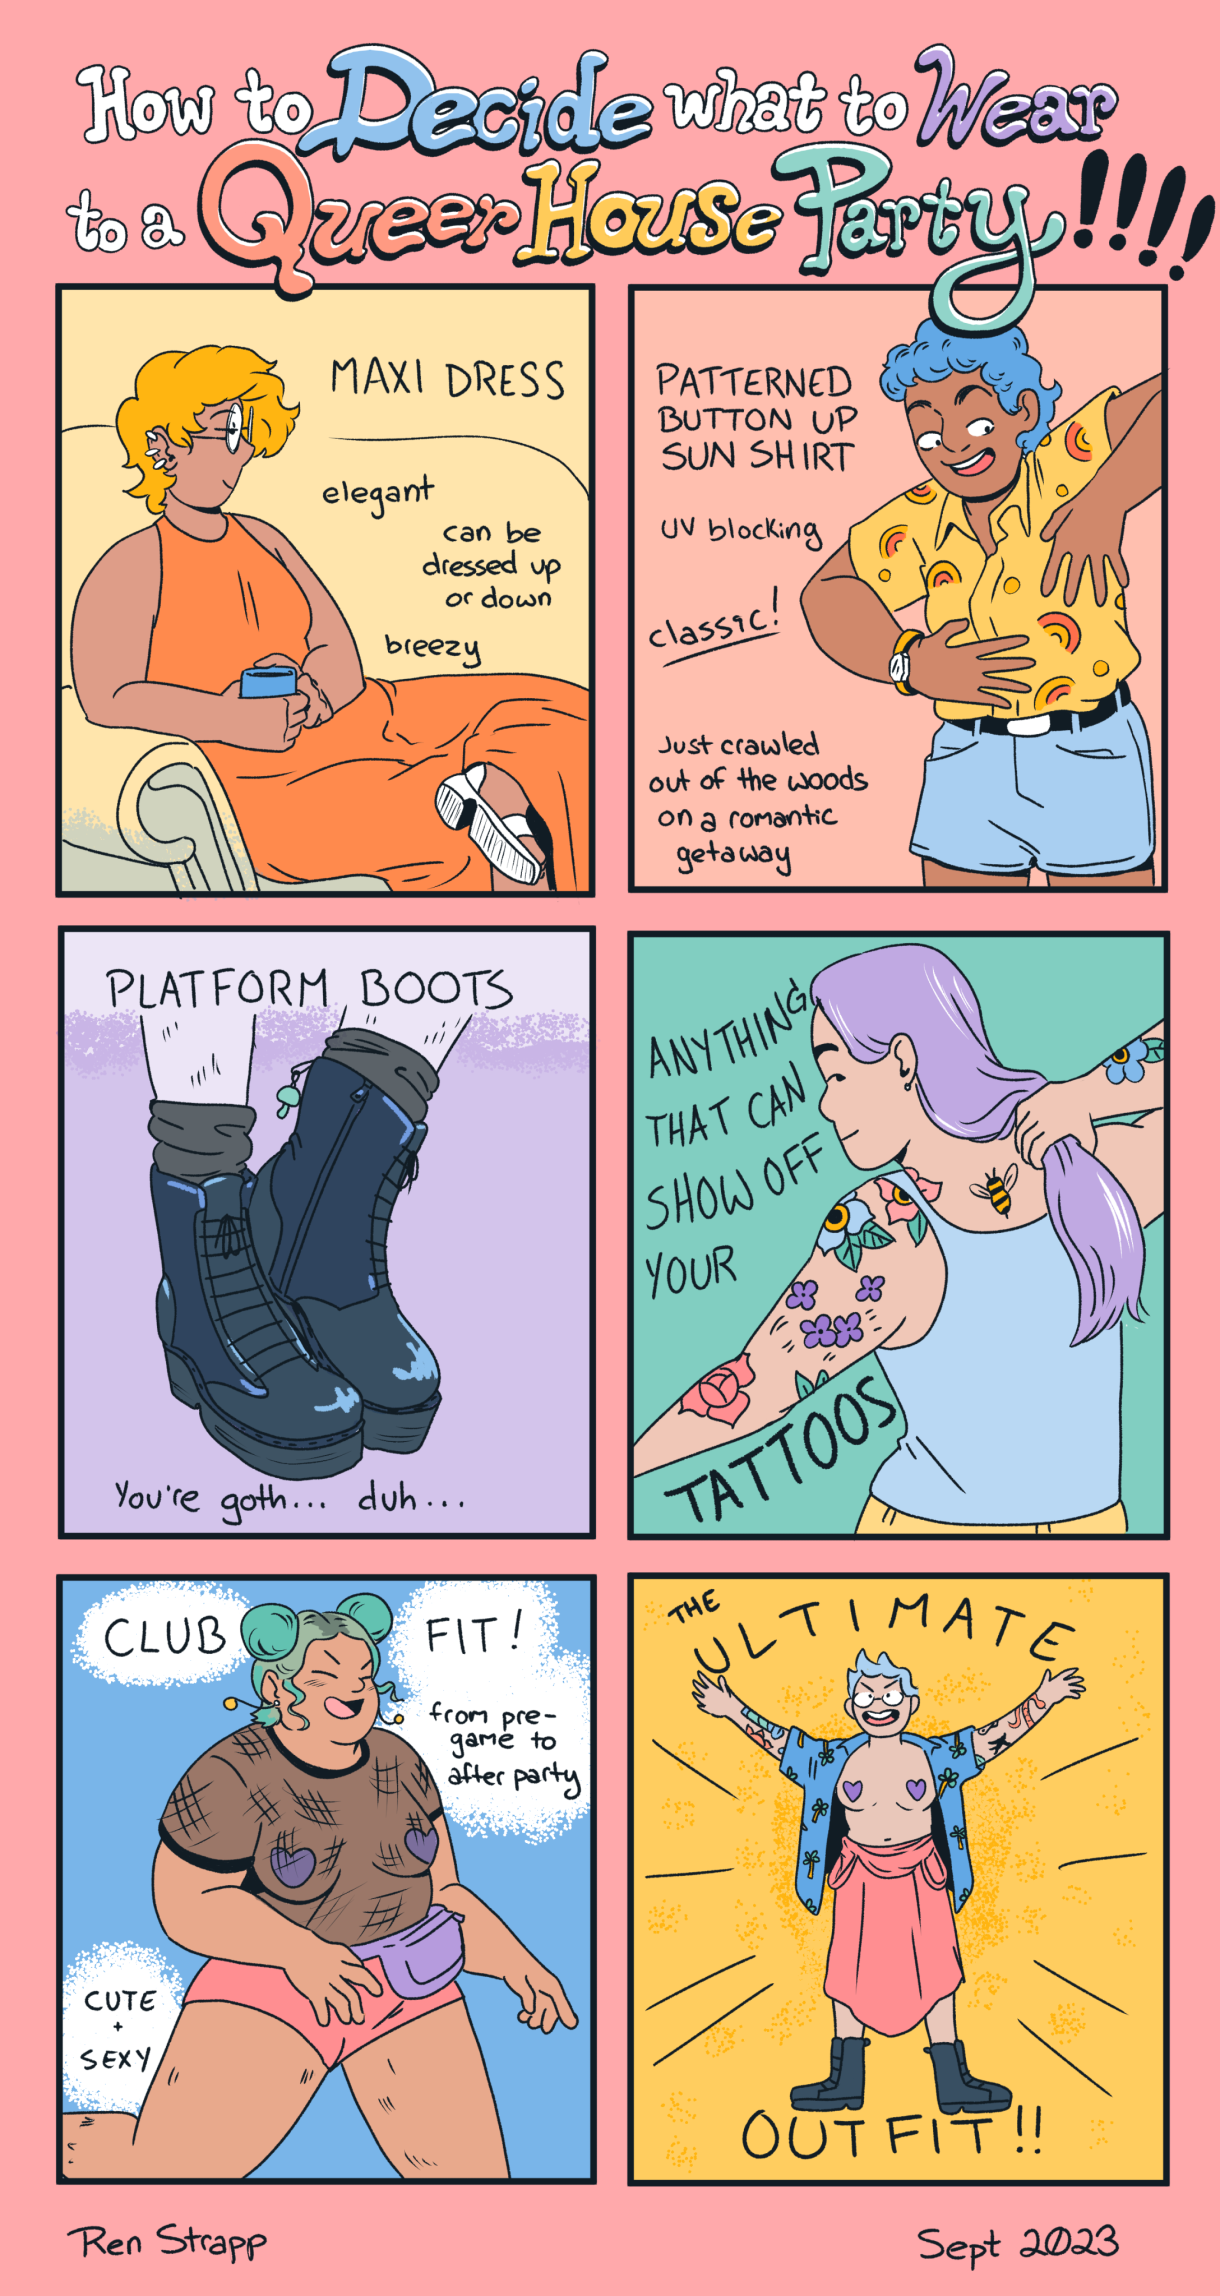 A six panel comic in colors of peach, purple, turquoise, and shades of yellow. The title is How to Decide What to Wear to a Queer House Party!! The options are: Maxi dress, patterned button up shirt, platform boots, tattoos, club fit, or the ultimate outfit (bare chested with pasties!)